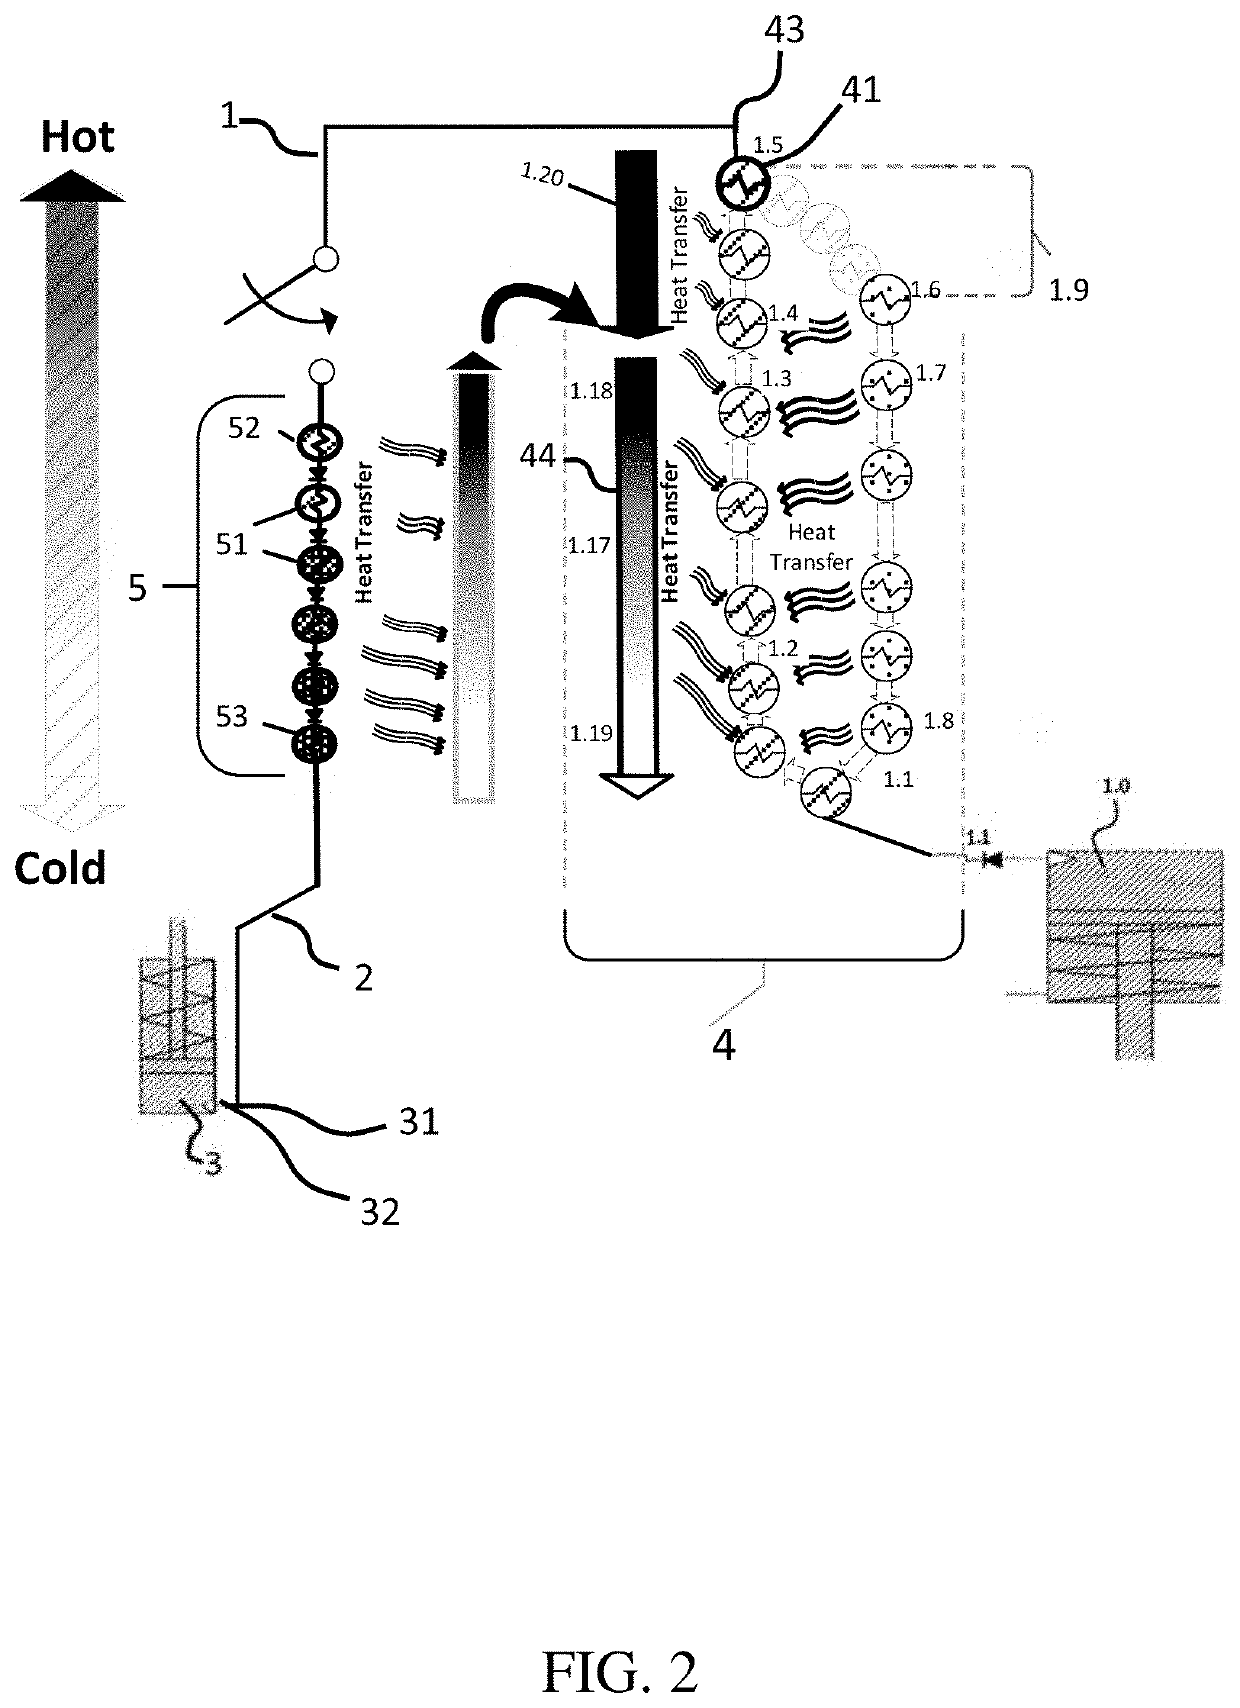 Systems and Methods for Compressing Gas Using Heat as Energy Source